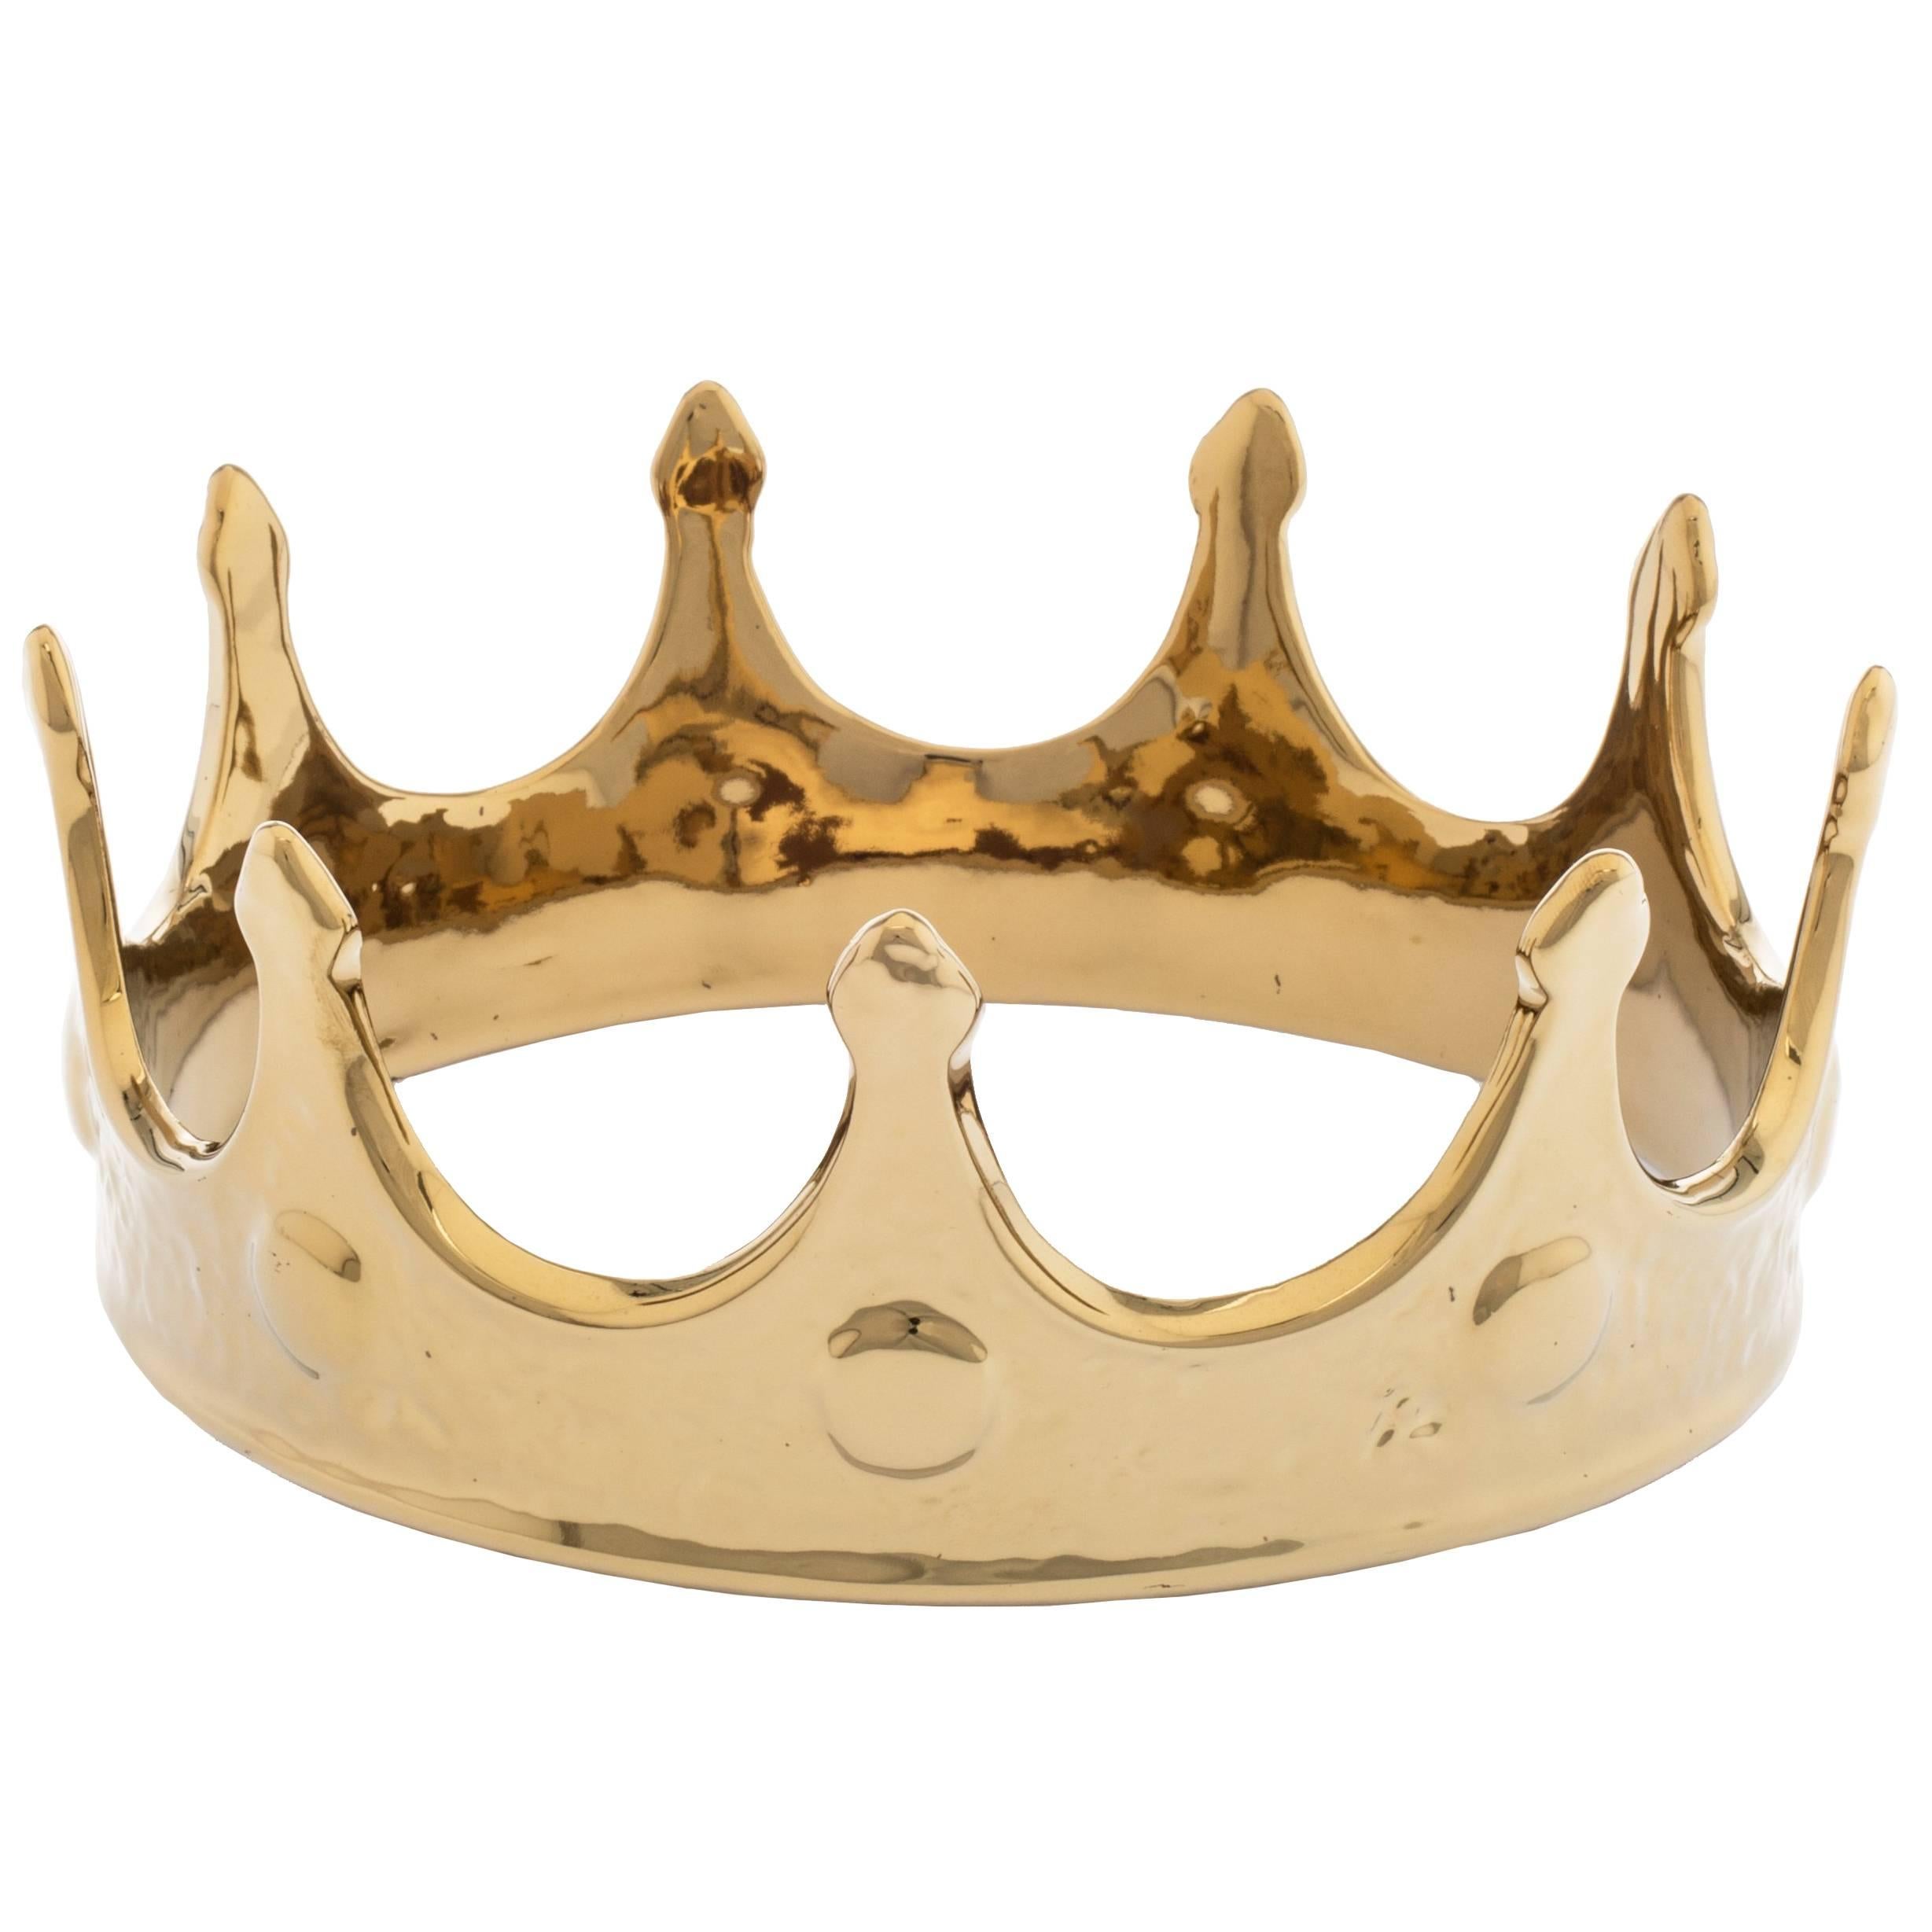 Seletti "Limited Gold Edition" Porcelain My Crown